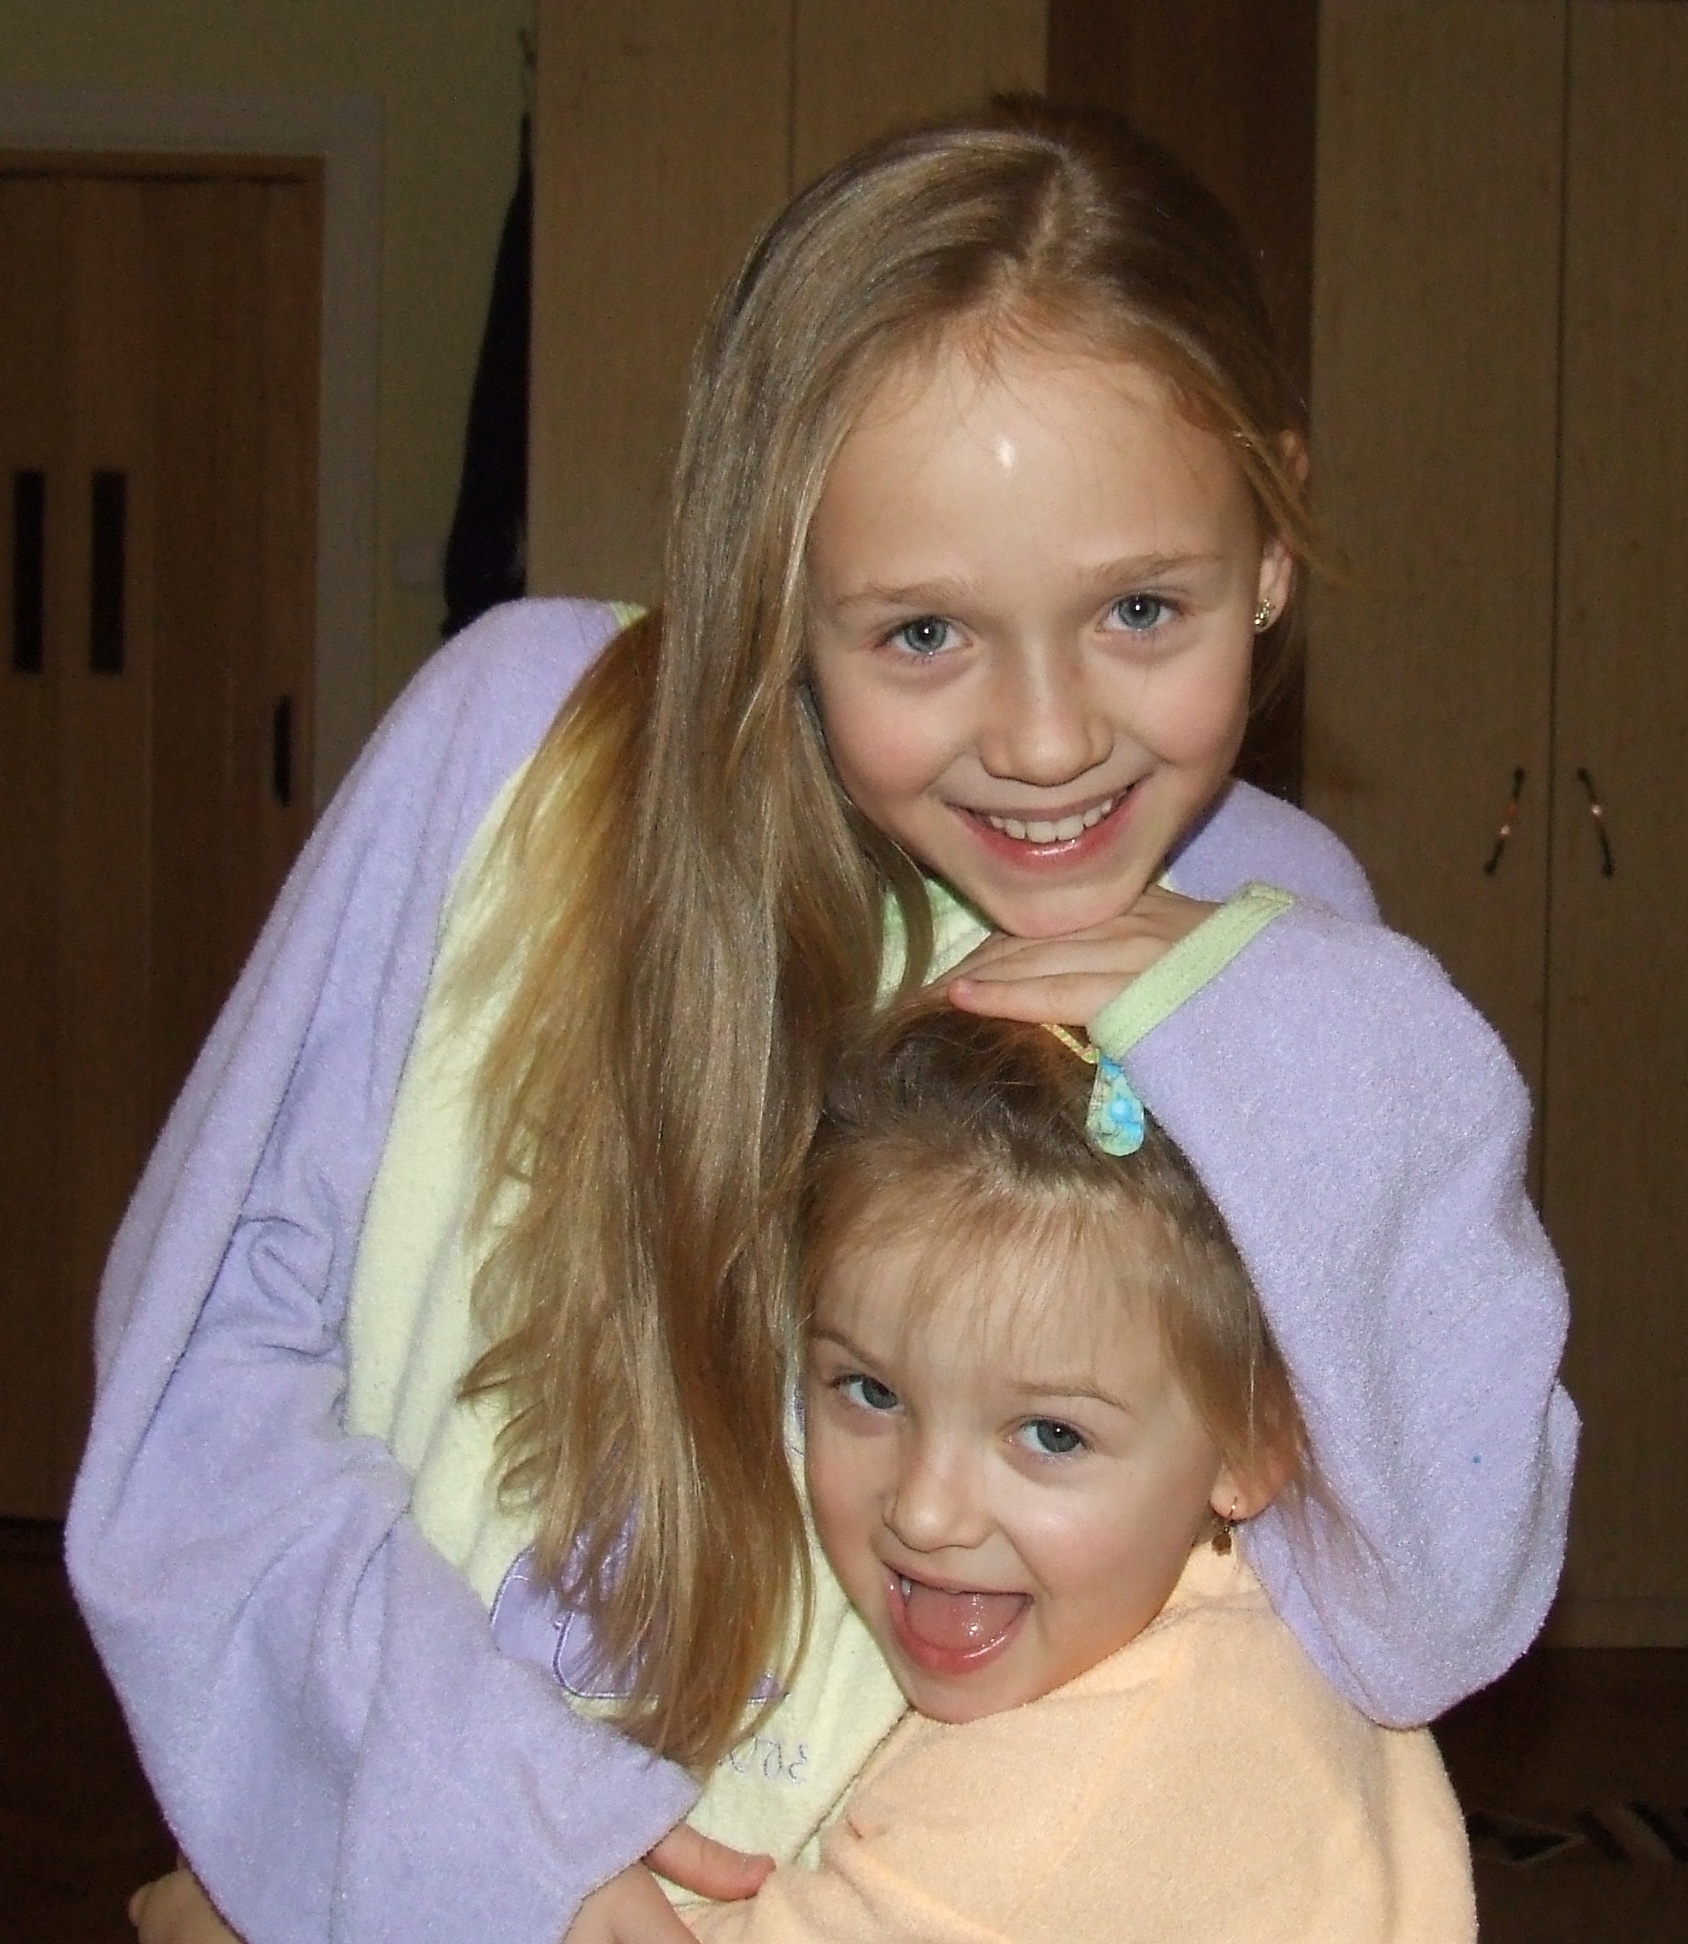 And yes, I totally just inserted of a photo of me and my little sister hugg...